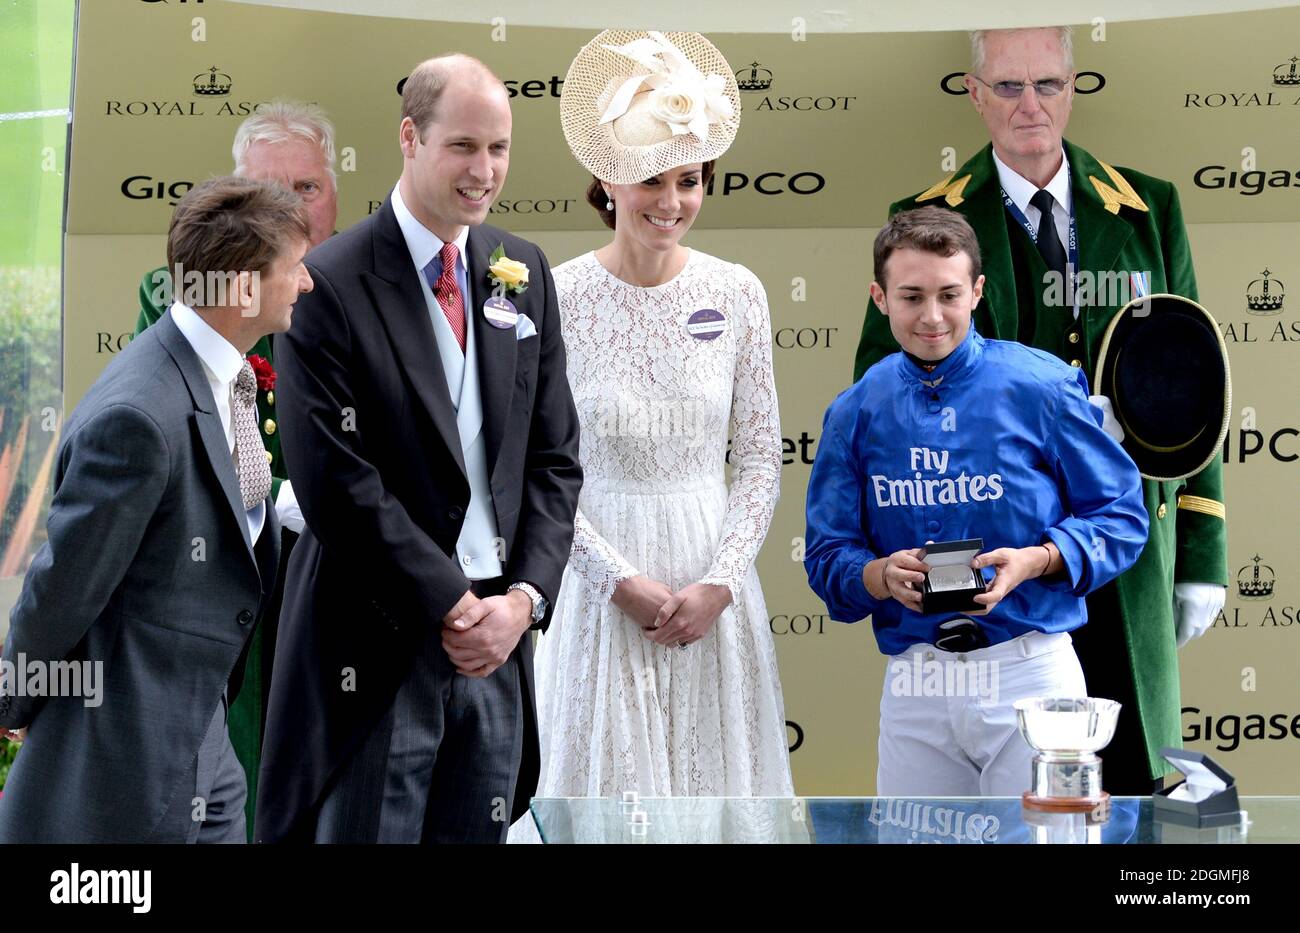 The Duke and Duchess of Cambridge during the presentation for the Duke of Cambridge Stakes to winner jockey Mickael Barzalona on Usherette, during day two of Royal Ascot 2016, at Ascot Racecourse. Stock Photo